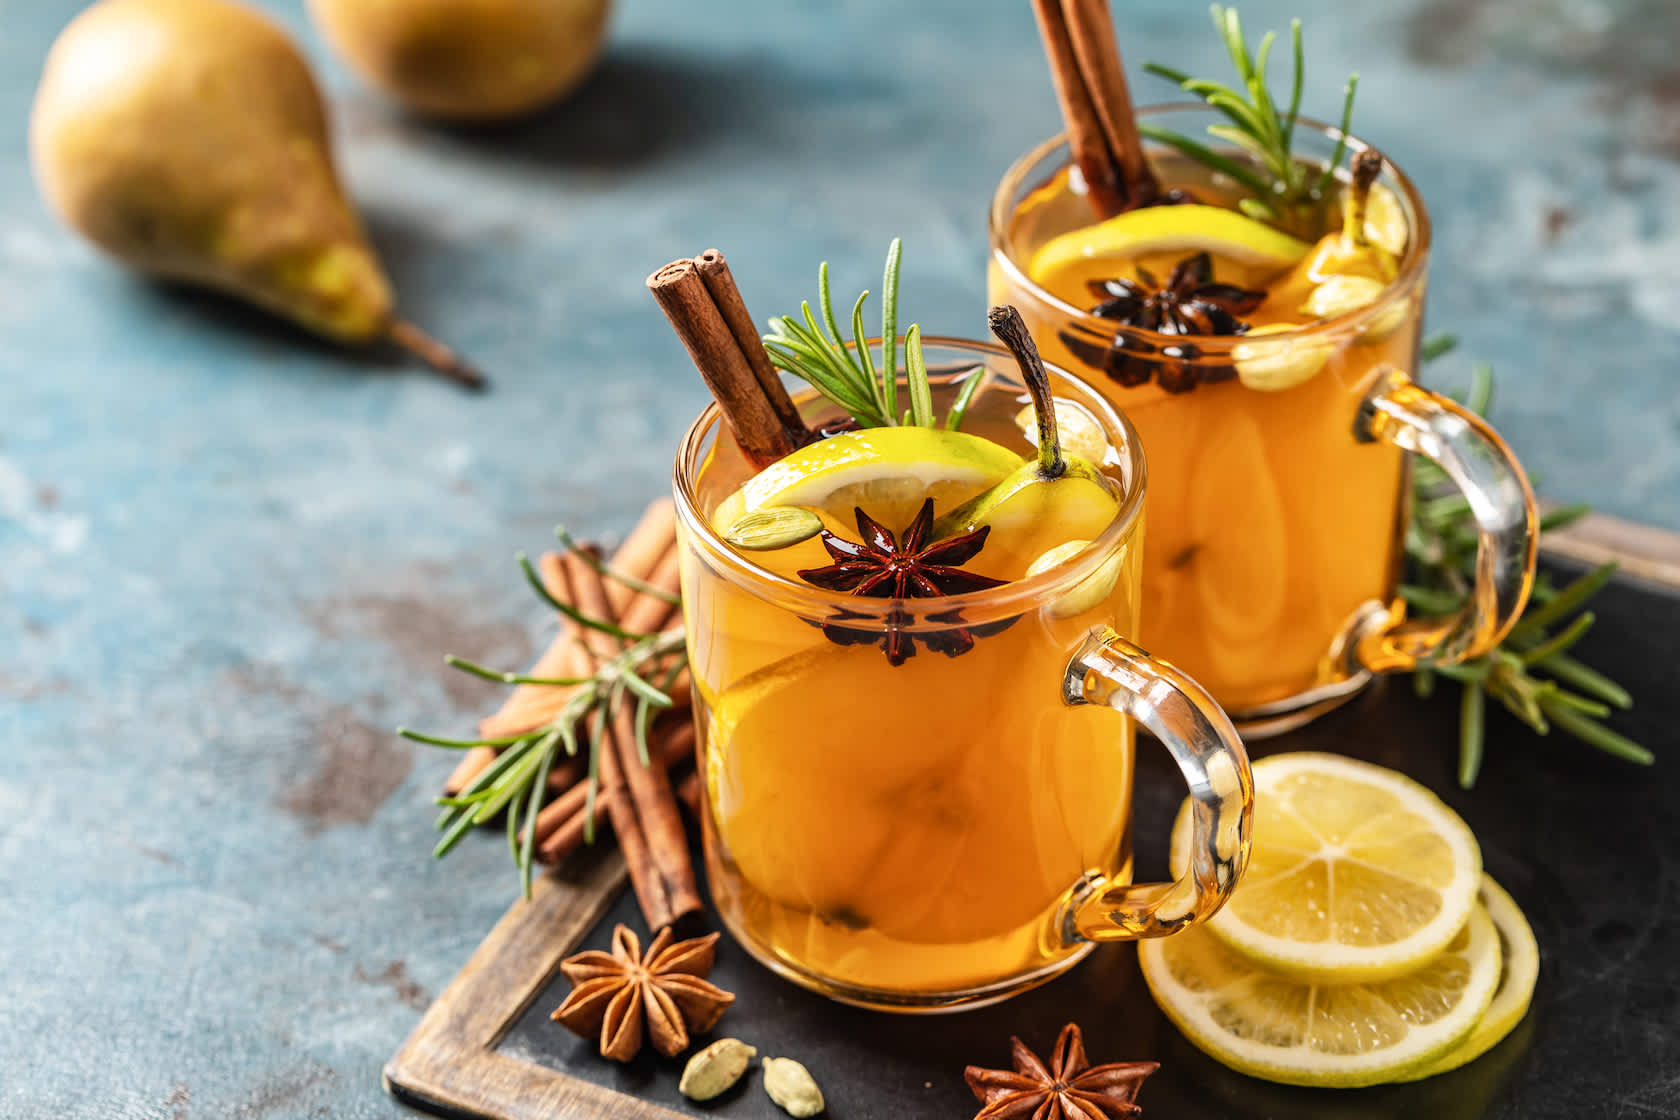 Hot Toddy Recipe: How to Make a Hot Toddy